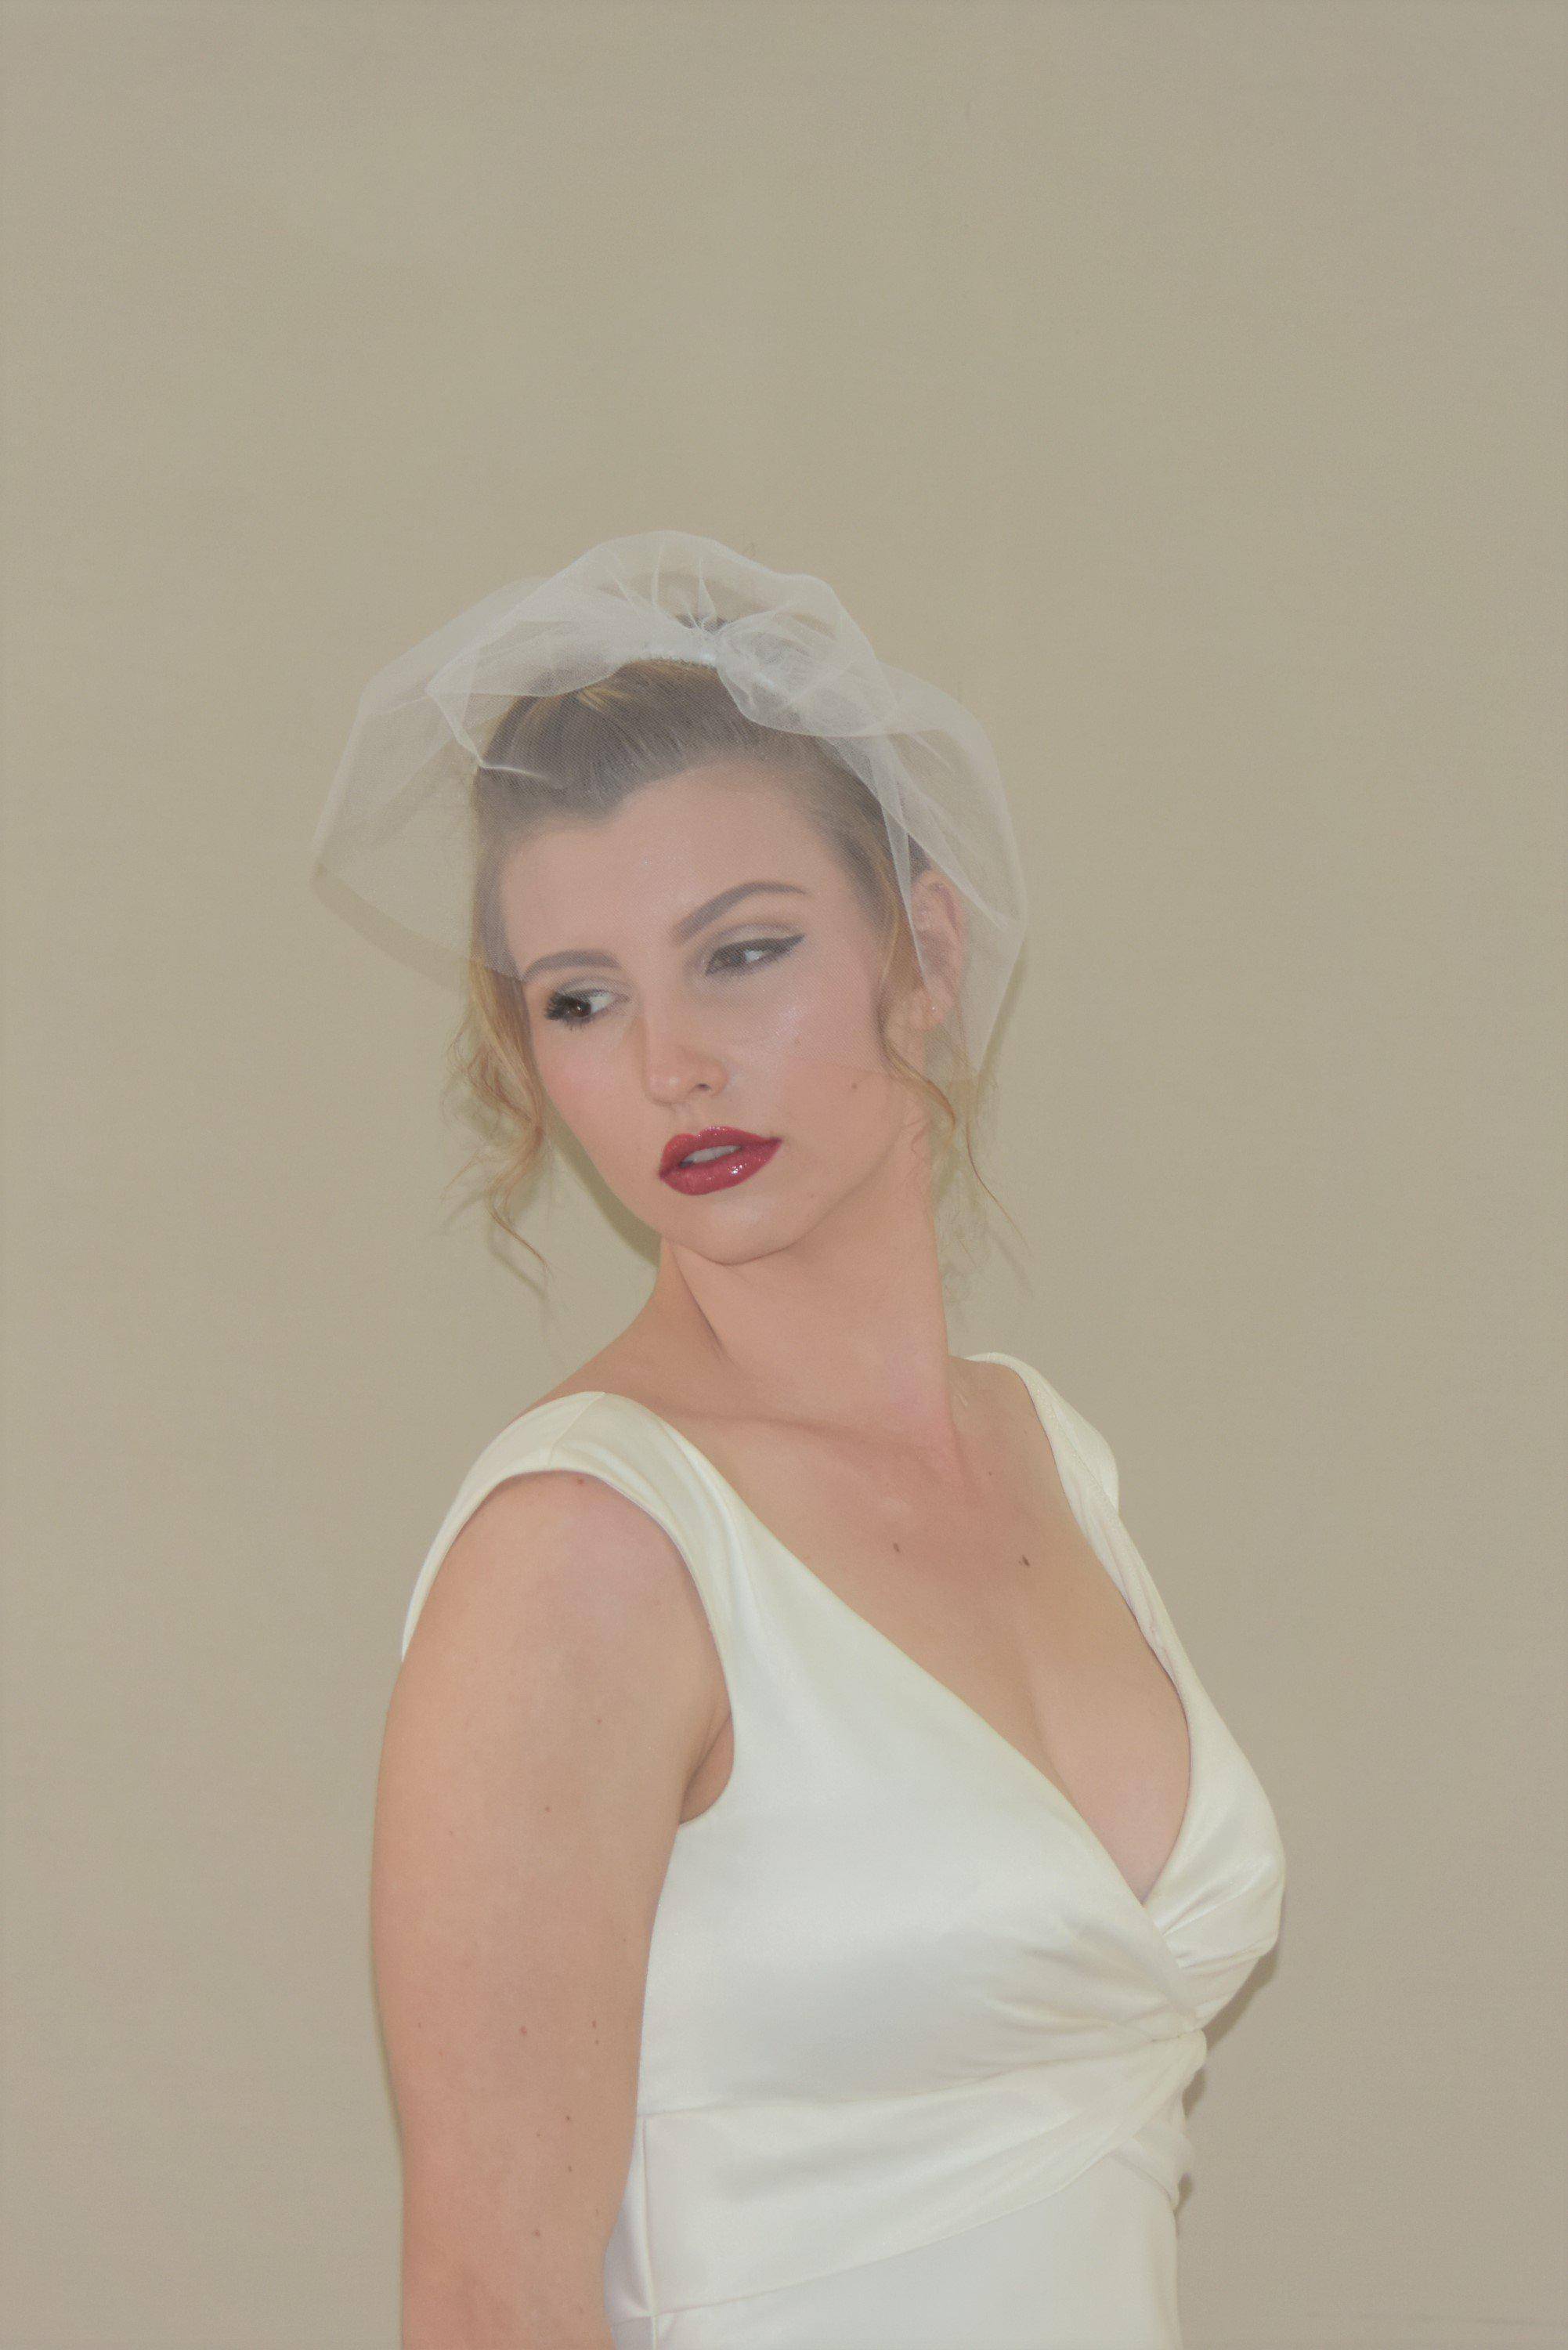 Mini Tulle Blusher Veil - Chic Veil |  Off-White / Scattered with Swarovski Pearls